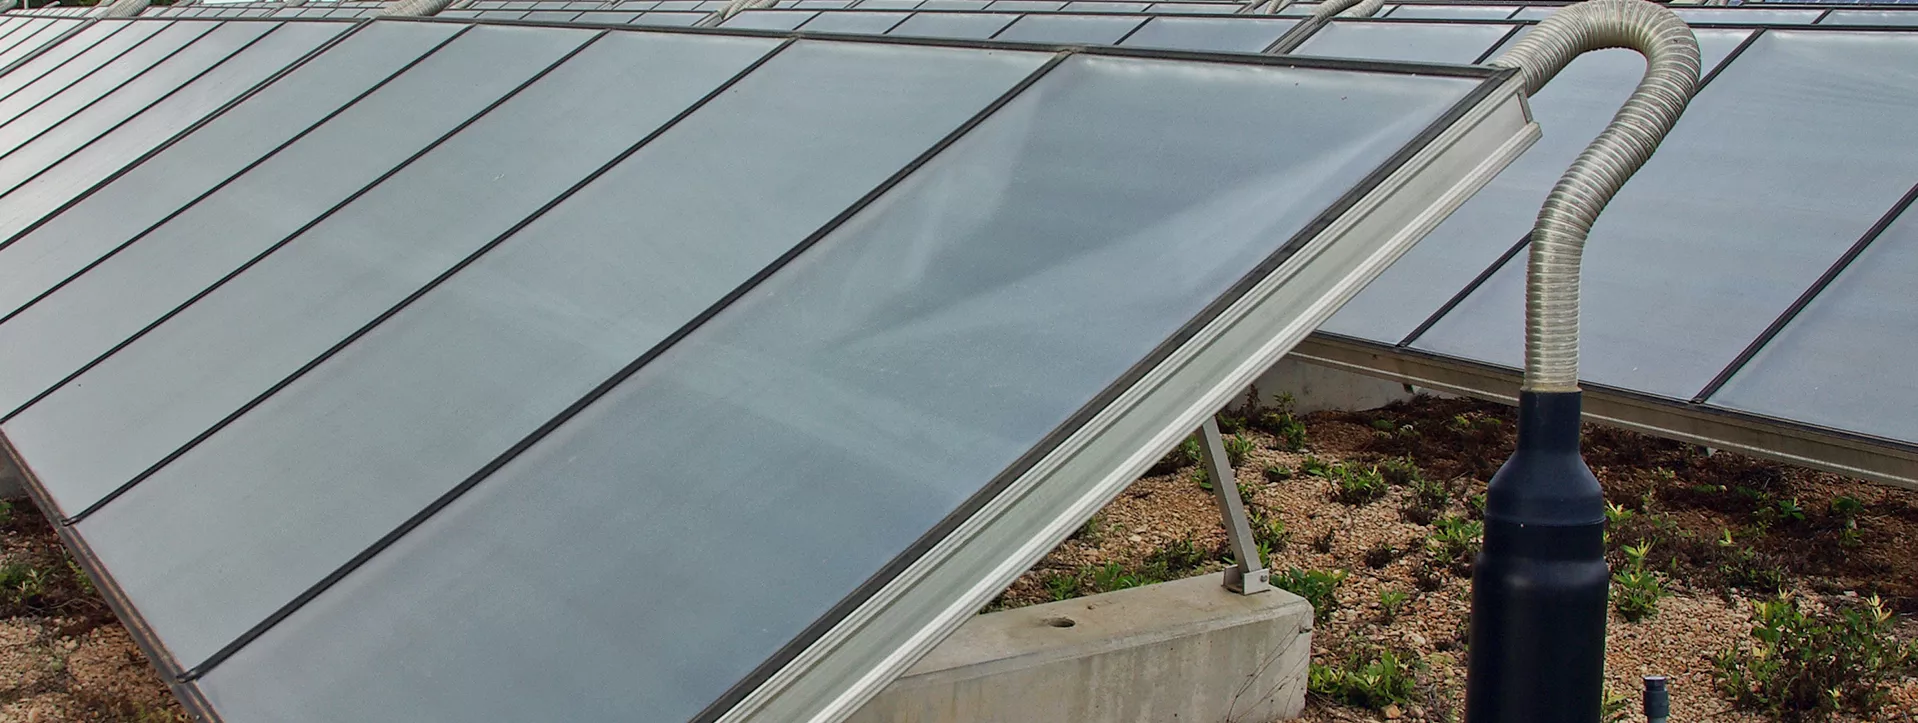 Industrial Solar Thermal Systems